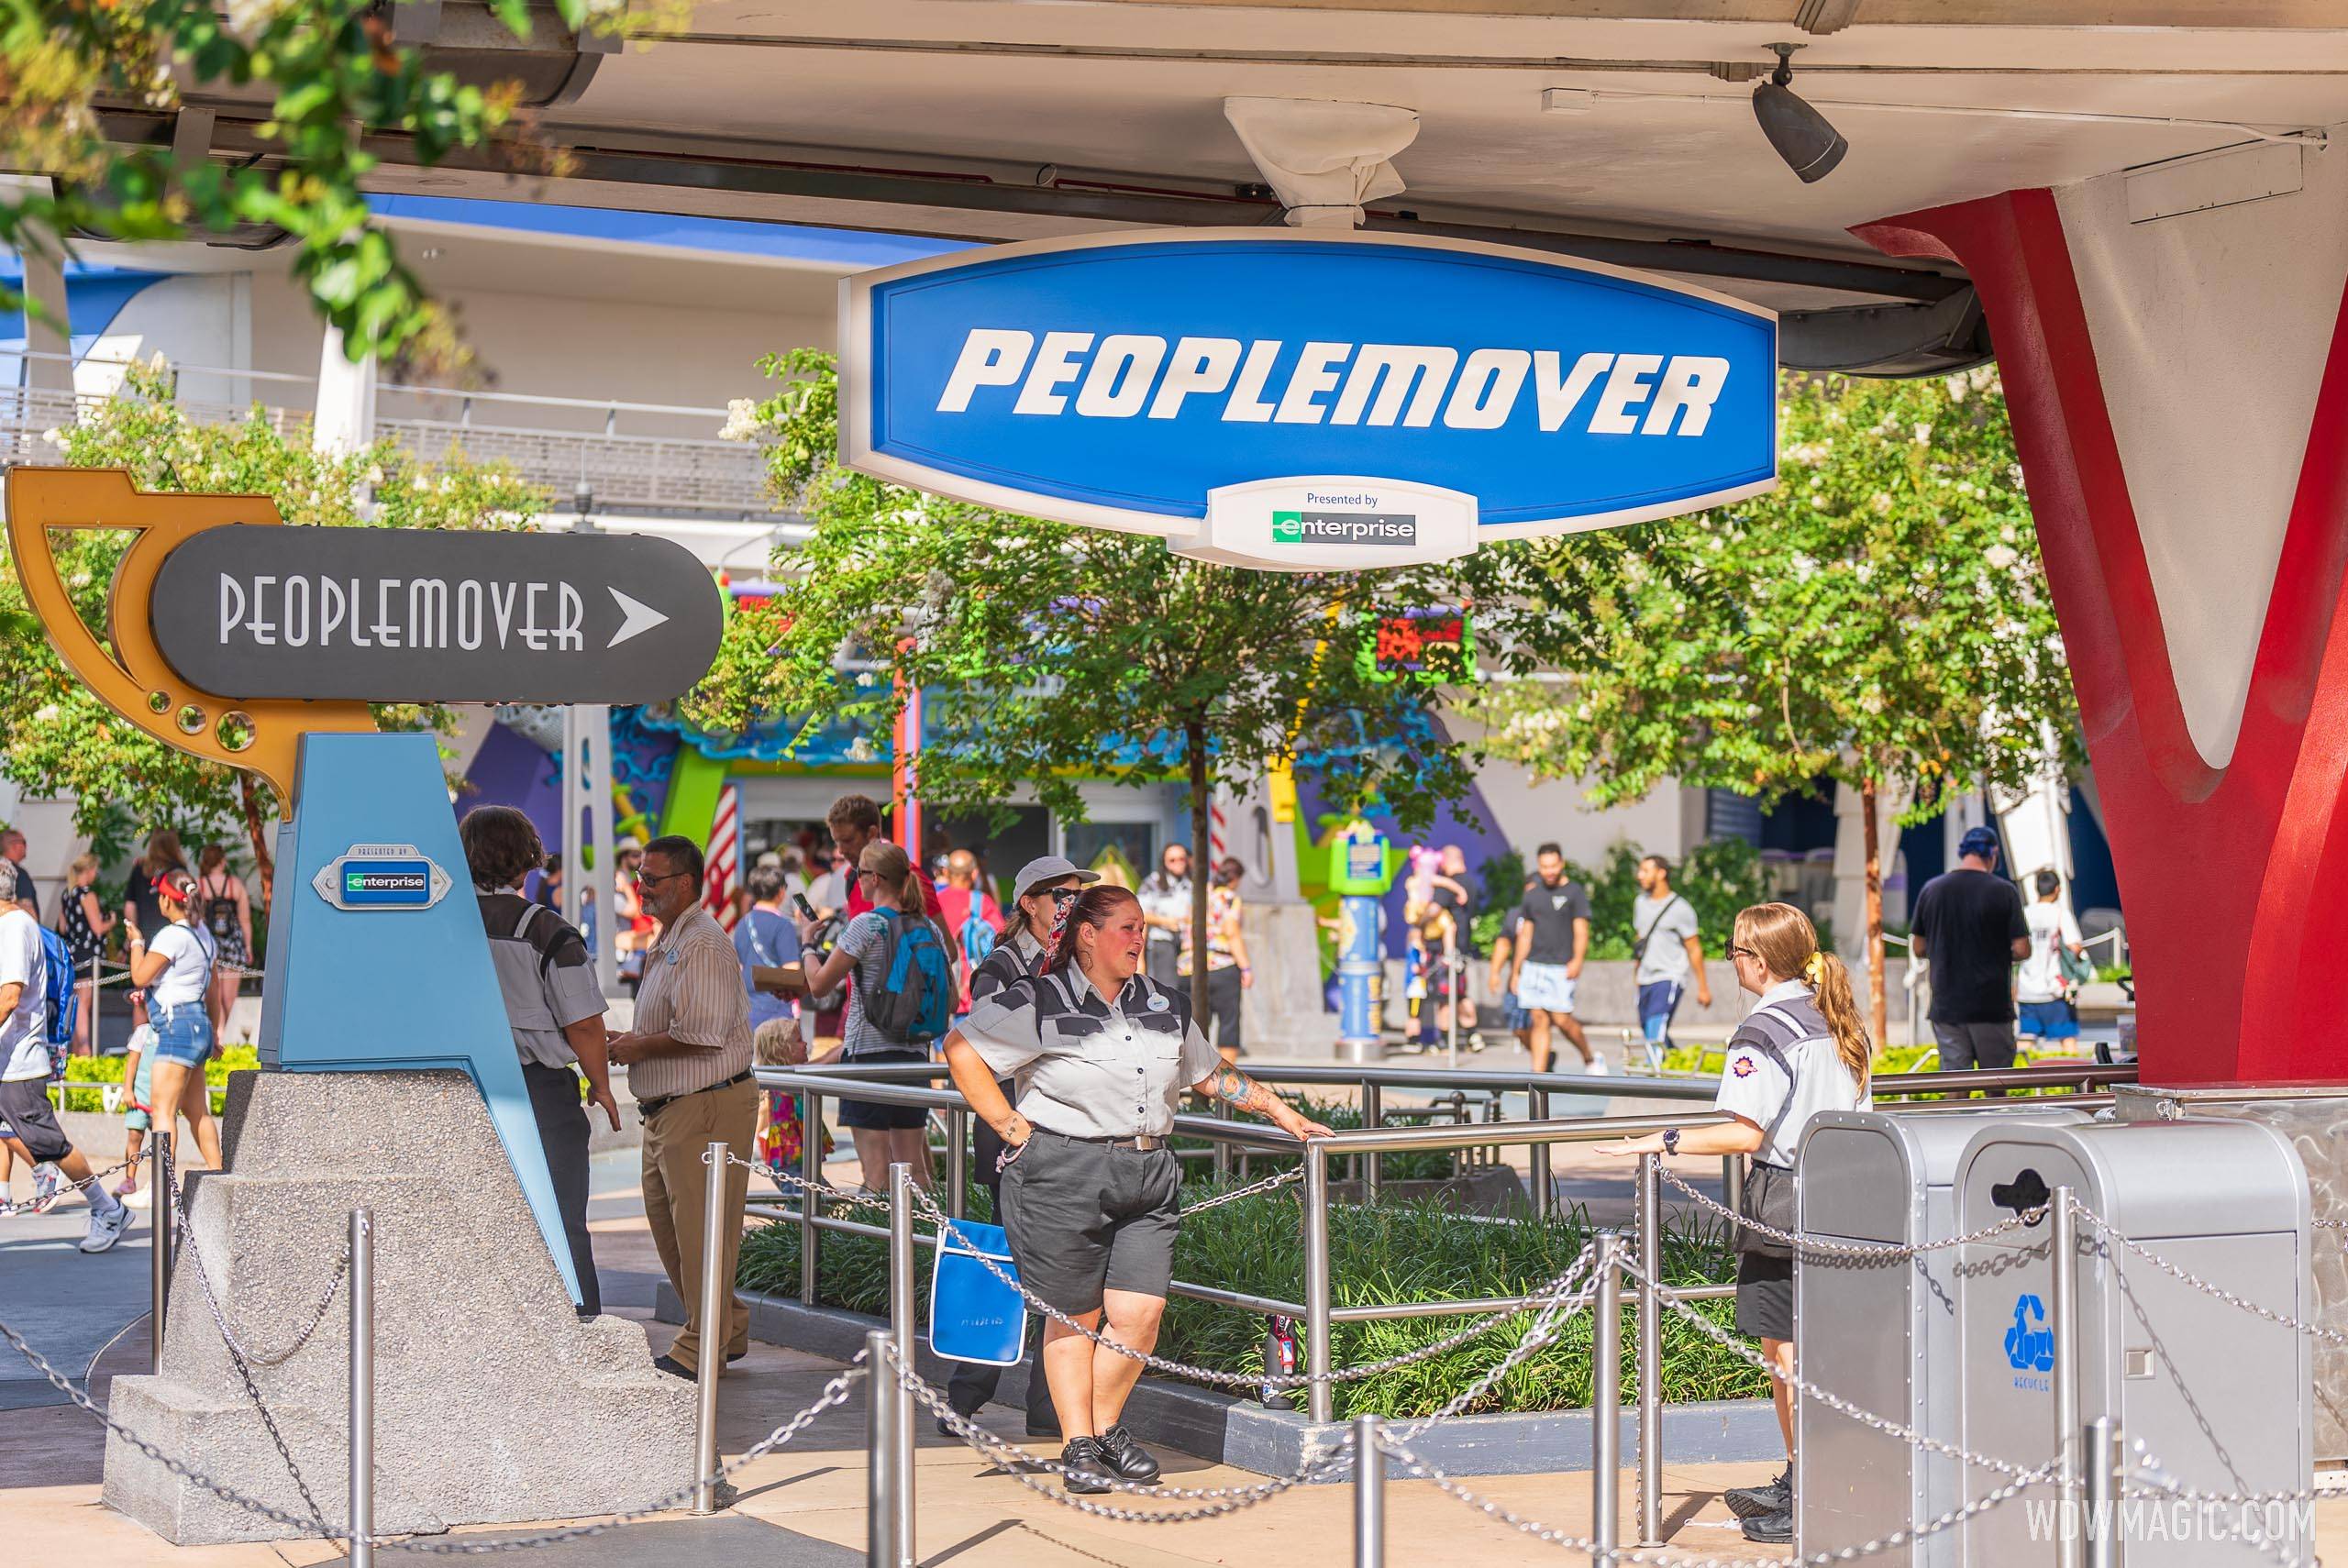 New signage at Tomorrowland Transit Authority PeopleMover - August 2022